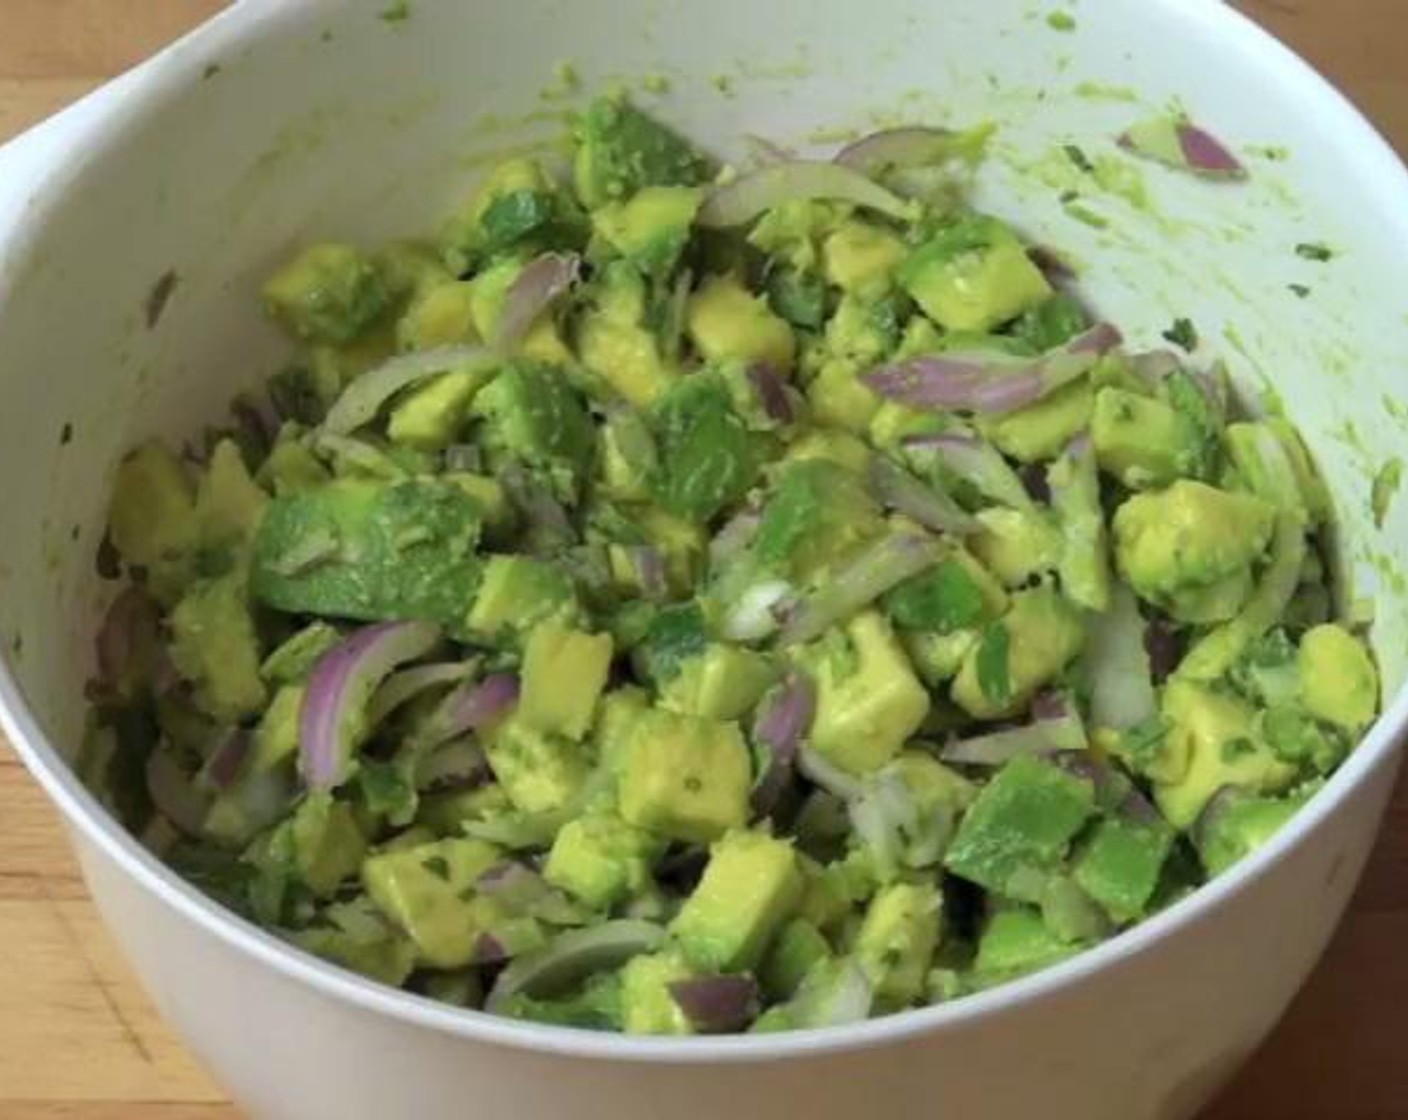 step 1 Into a mixing bowl, add your Avocados (4) chopped Red Onion (1), Garlic (1 clove), Green Bell Pepper (1), Fresh Cilantro (2 Tbsp), Sun-Dried Tomatoes (2 1/4 cups), and Salt (to taste), Freshly Ground Black Pepper (to taste) and mix everything with a good stir.